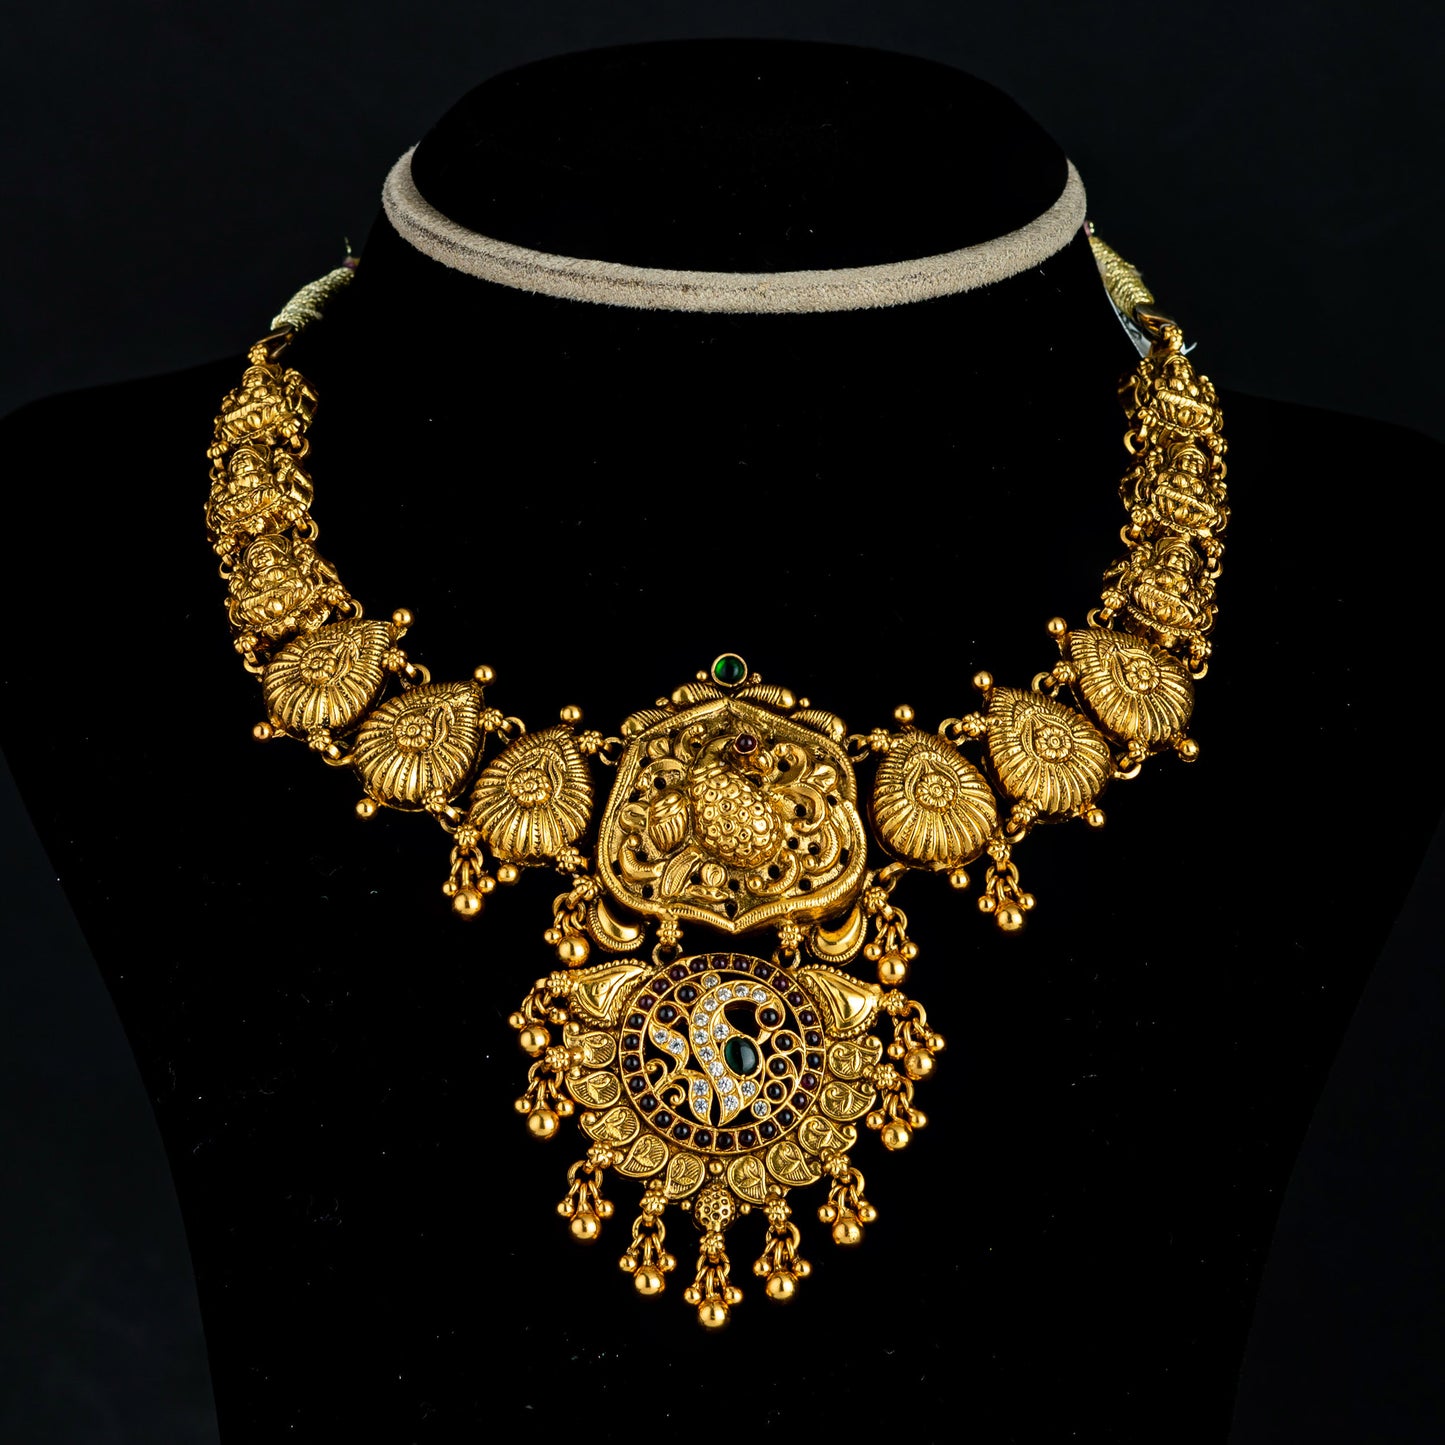 Eva Nakshi Necklace, Gold plated 92.5 silver nakshi necklace featuring premium CZ, emerald stones and rubies